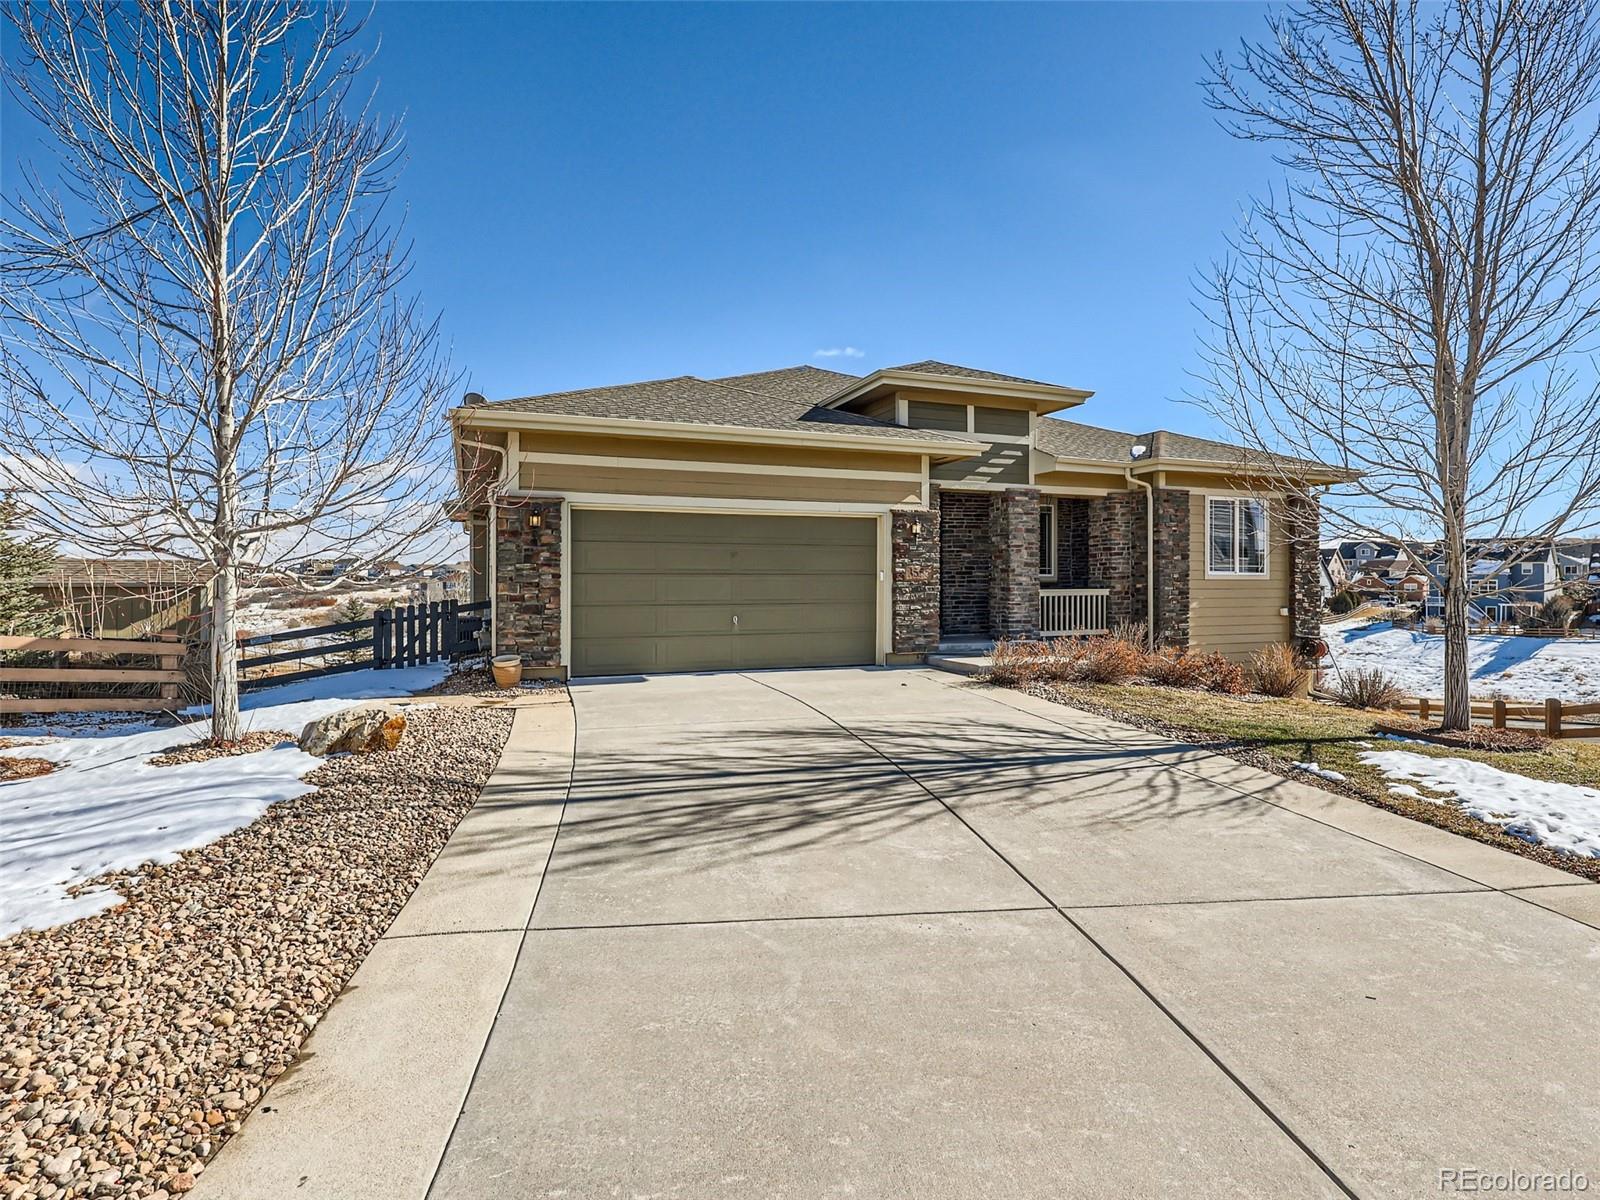 Report Image for 3555  Tailfeather Way,Castle Rock, Colorado